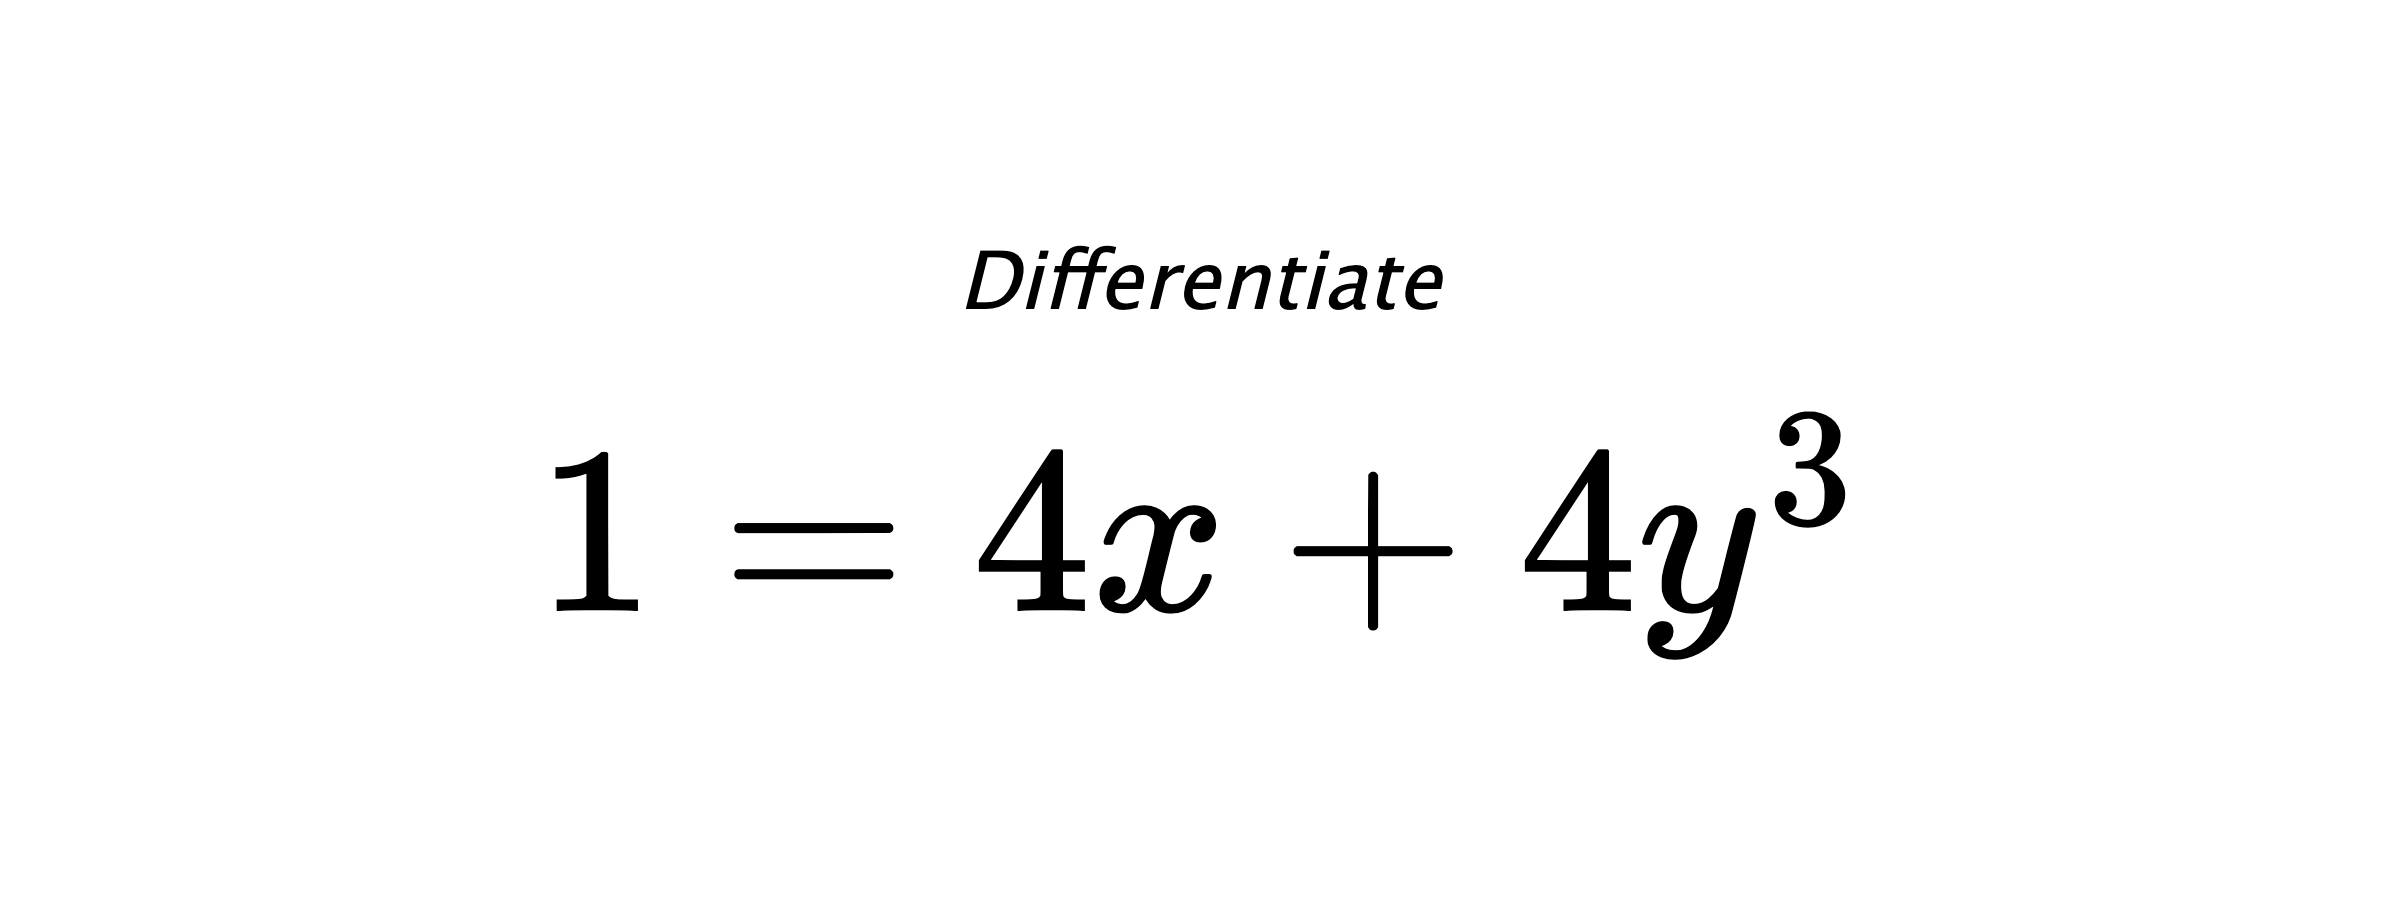 Differentiate $ 1 = 4 x + 4 y^{3} $